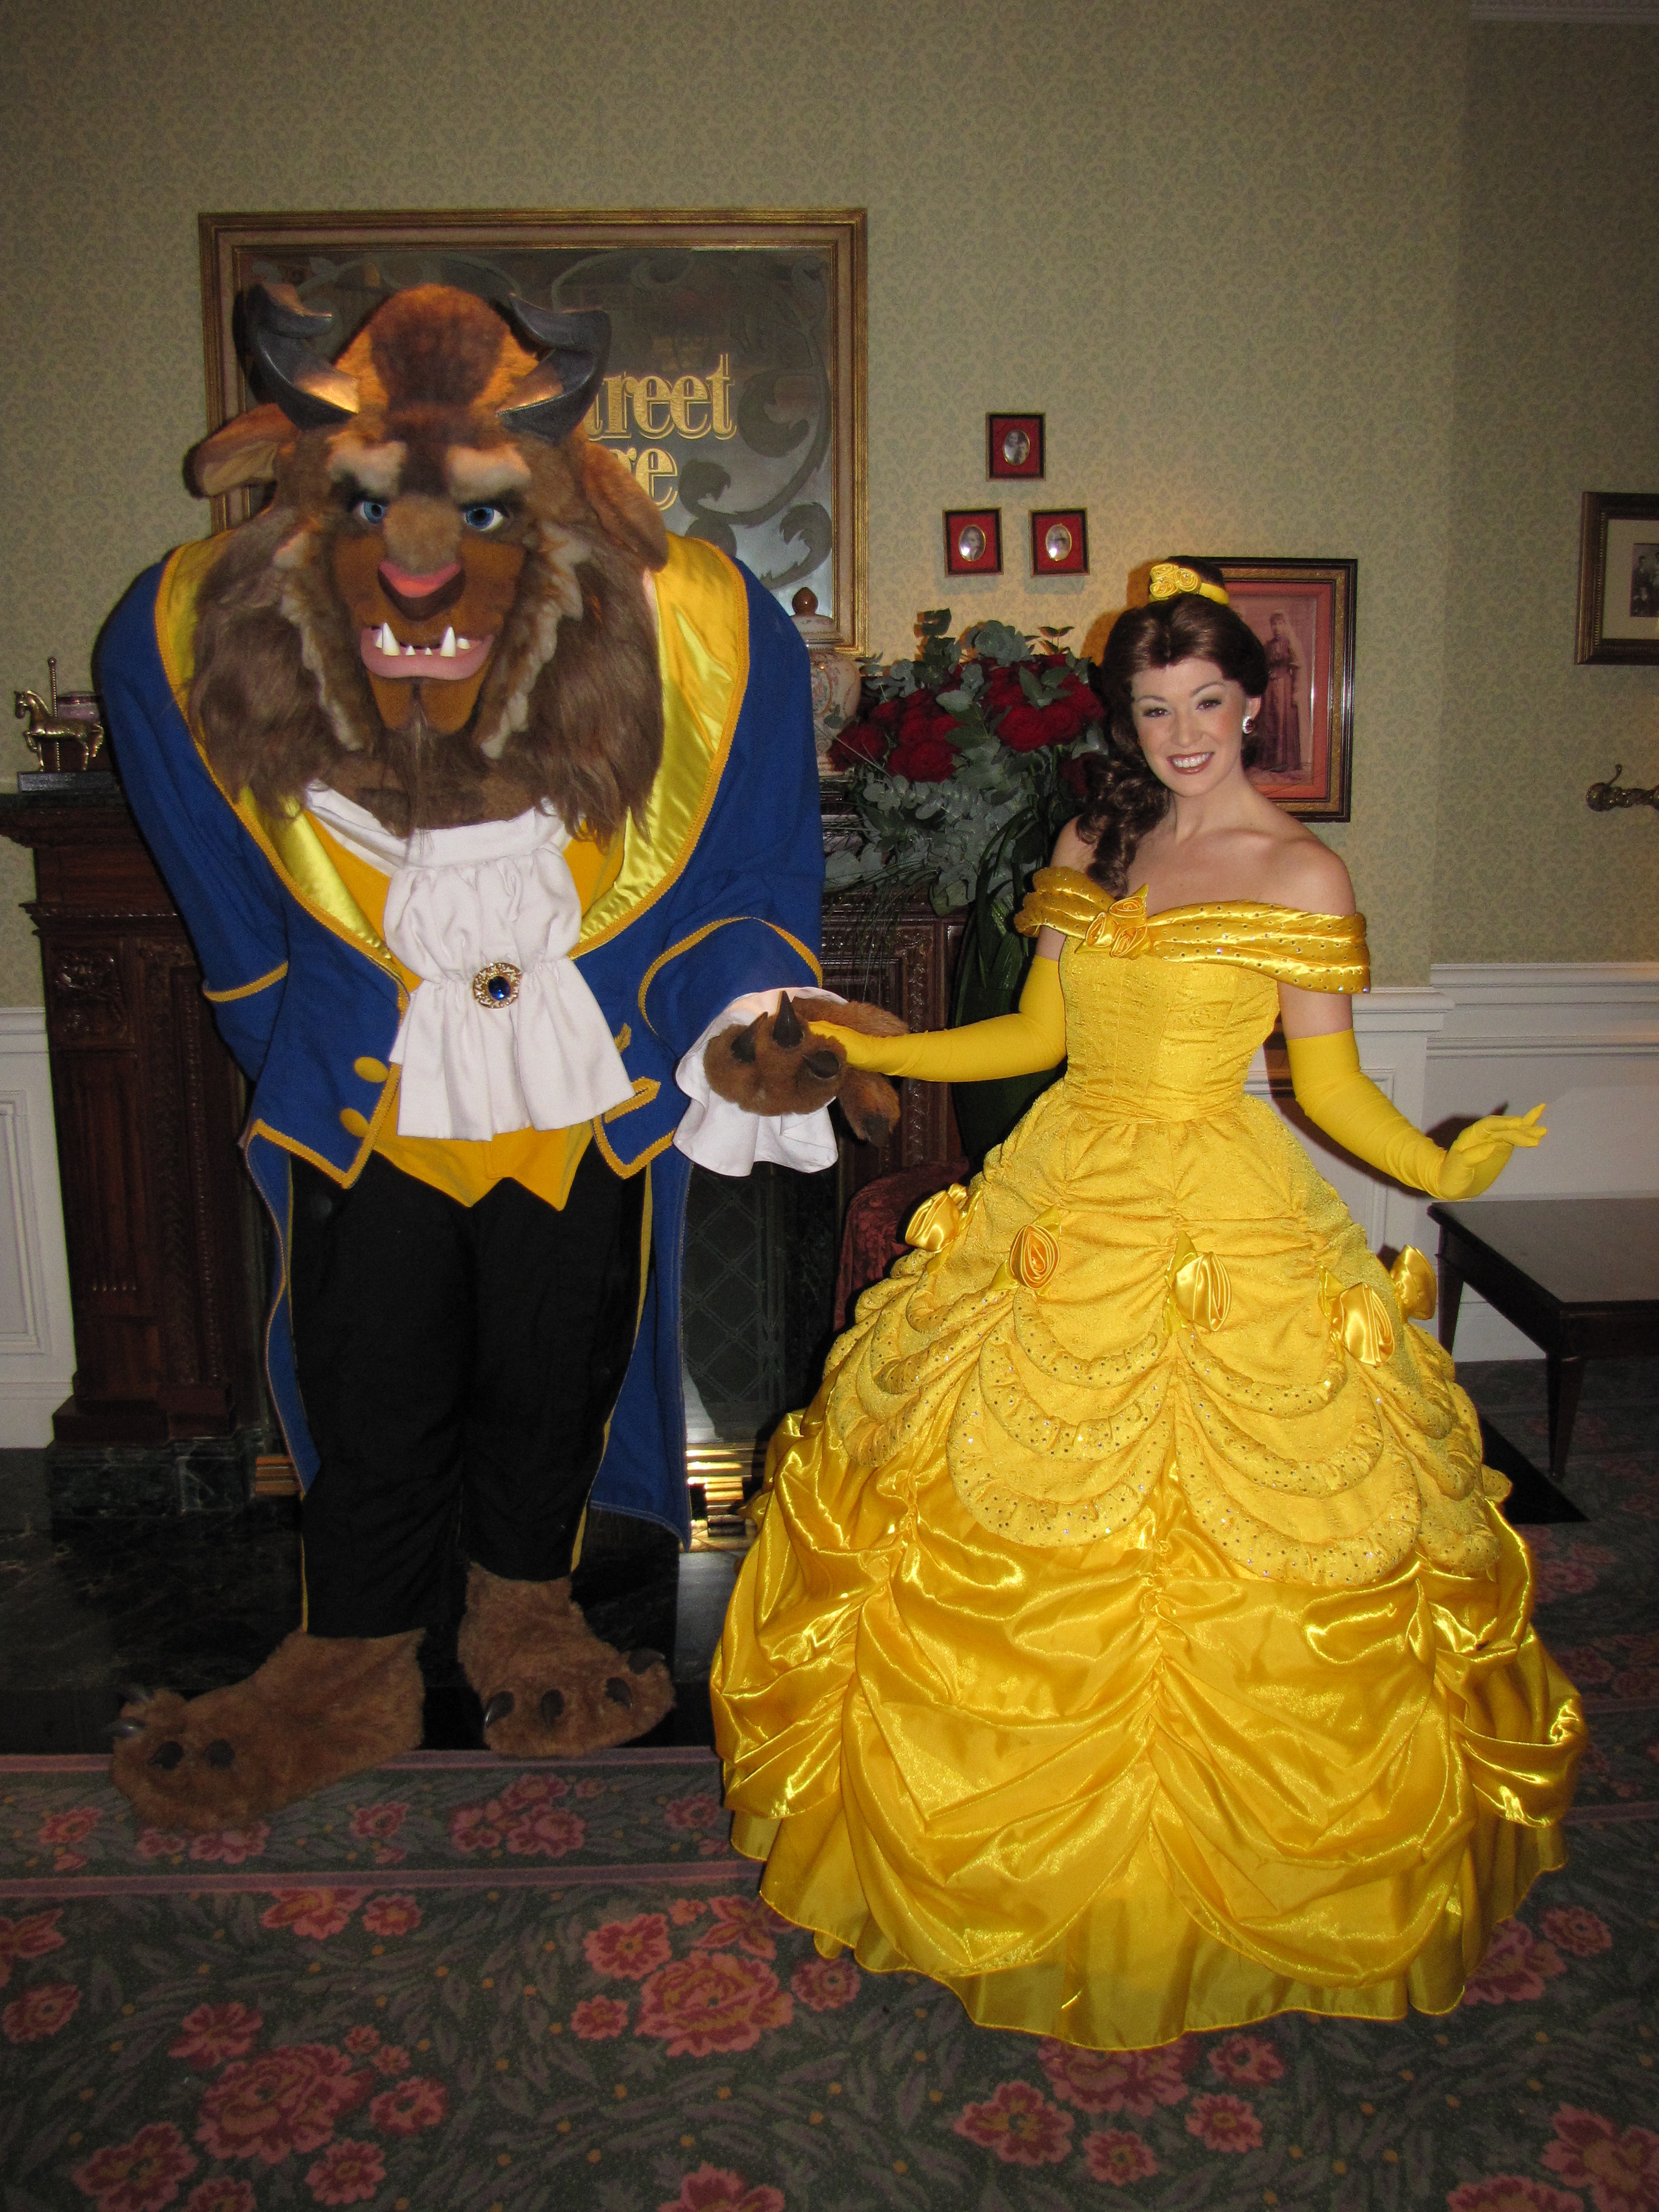 Belle and the Beast doing a special Meet'n'Greet during Valentine's Day 2010 at the Disneyland Hotel.